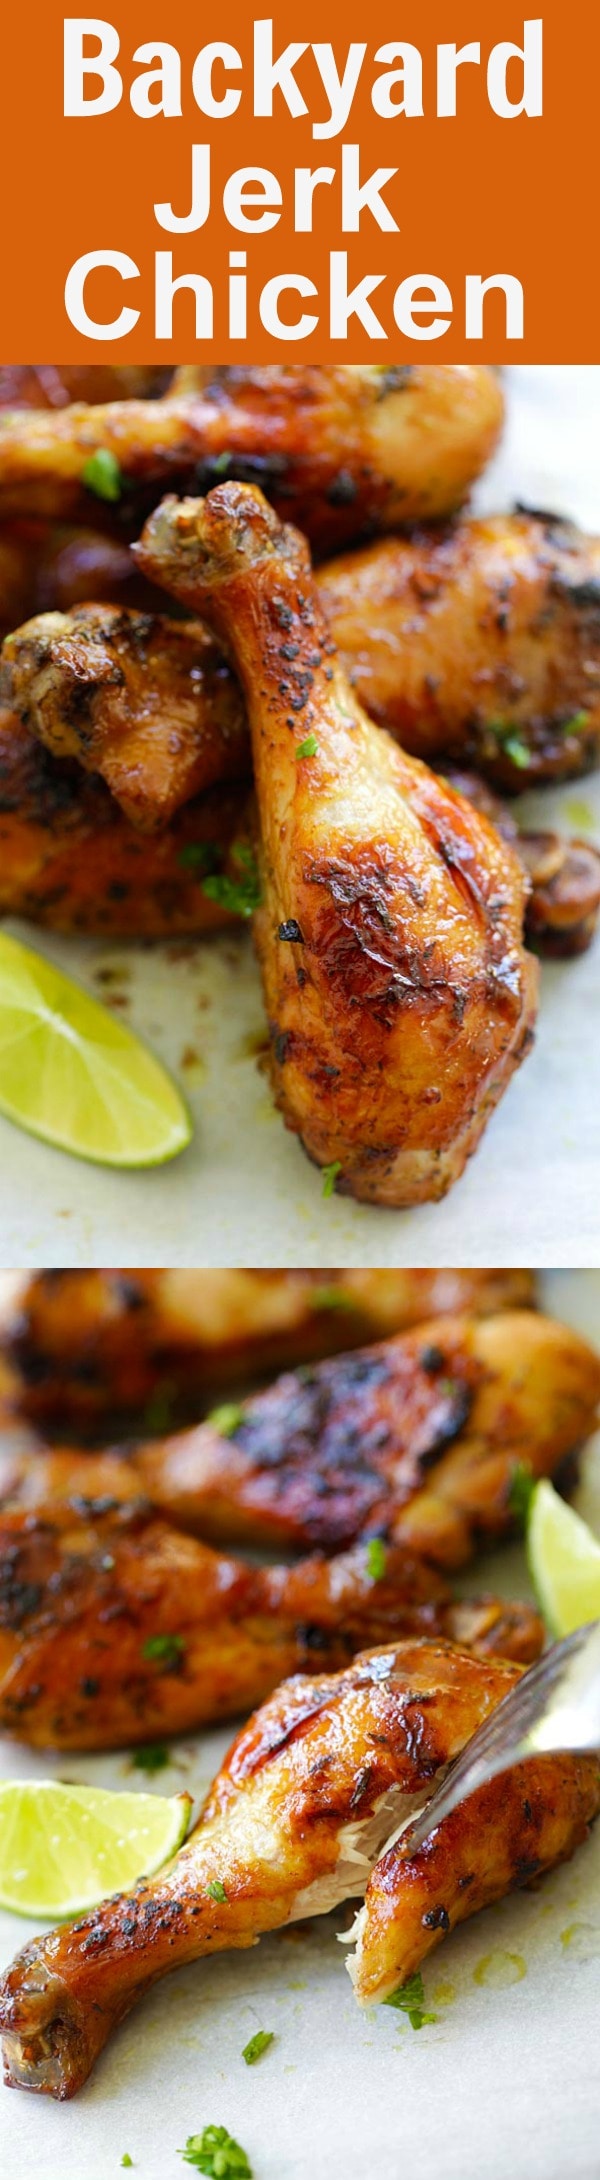 Jerk Chicken - Homemade jerk chicken recipe that you can grill right at your backyard. Delicious, moist and spicy chicken that everyone loves | rasamalaysia.com